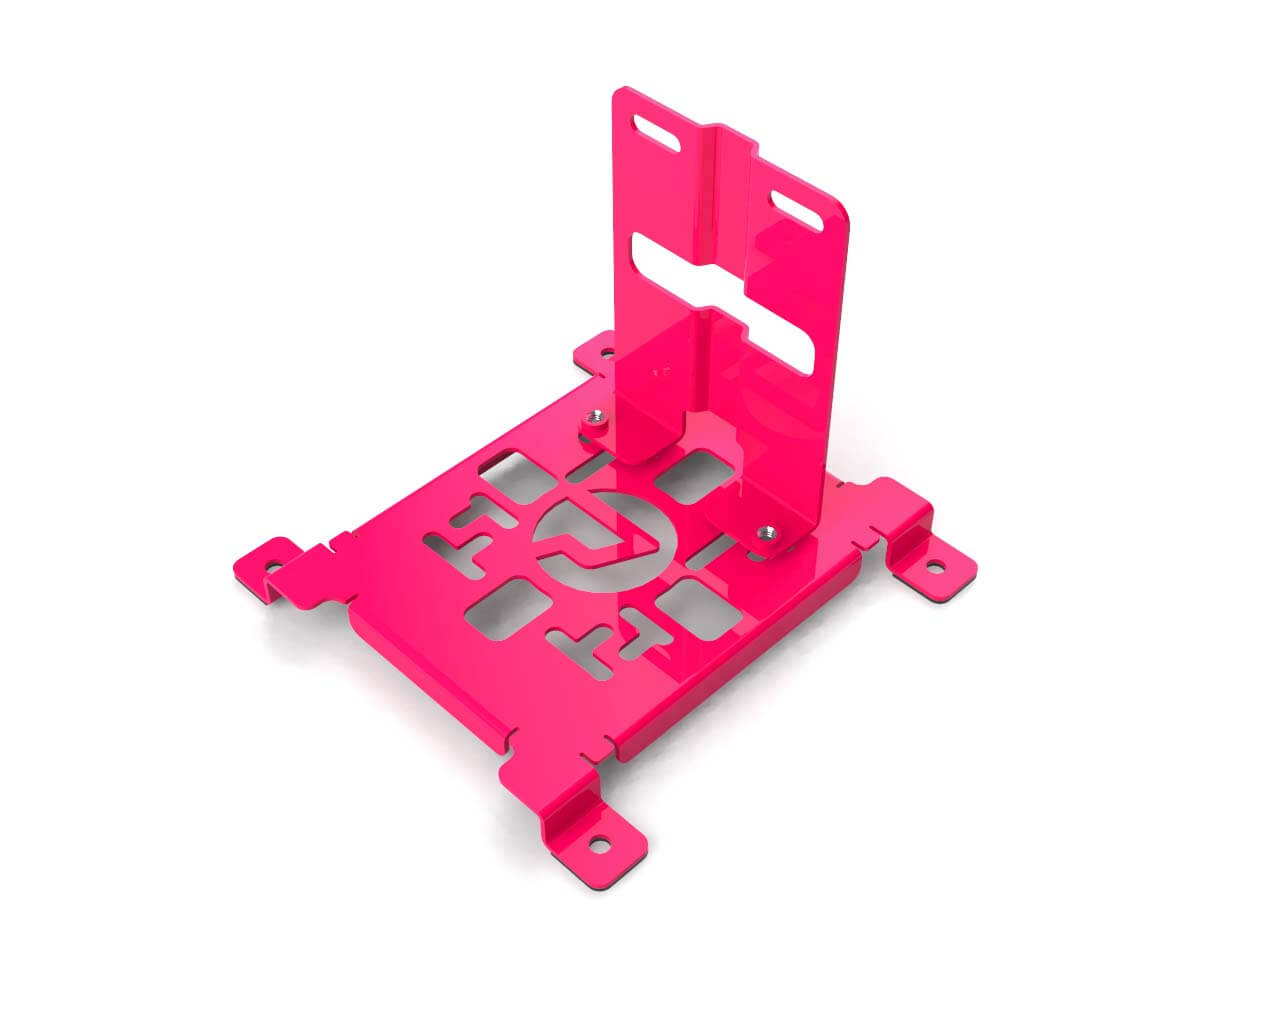 PrimoChill SX CTR2 Spider Mount Bracket Kit - 120mm Series - PrimoChill - KEEPING IT COOL UV Pink